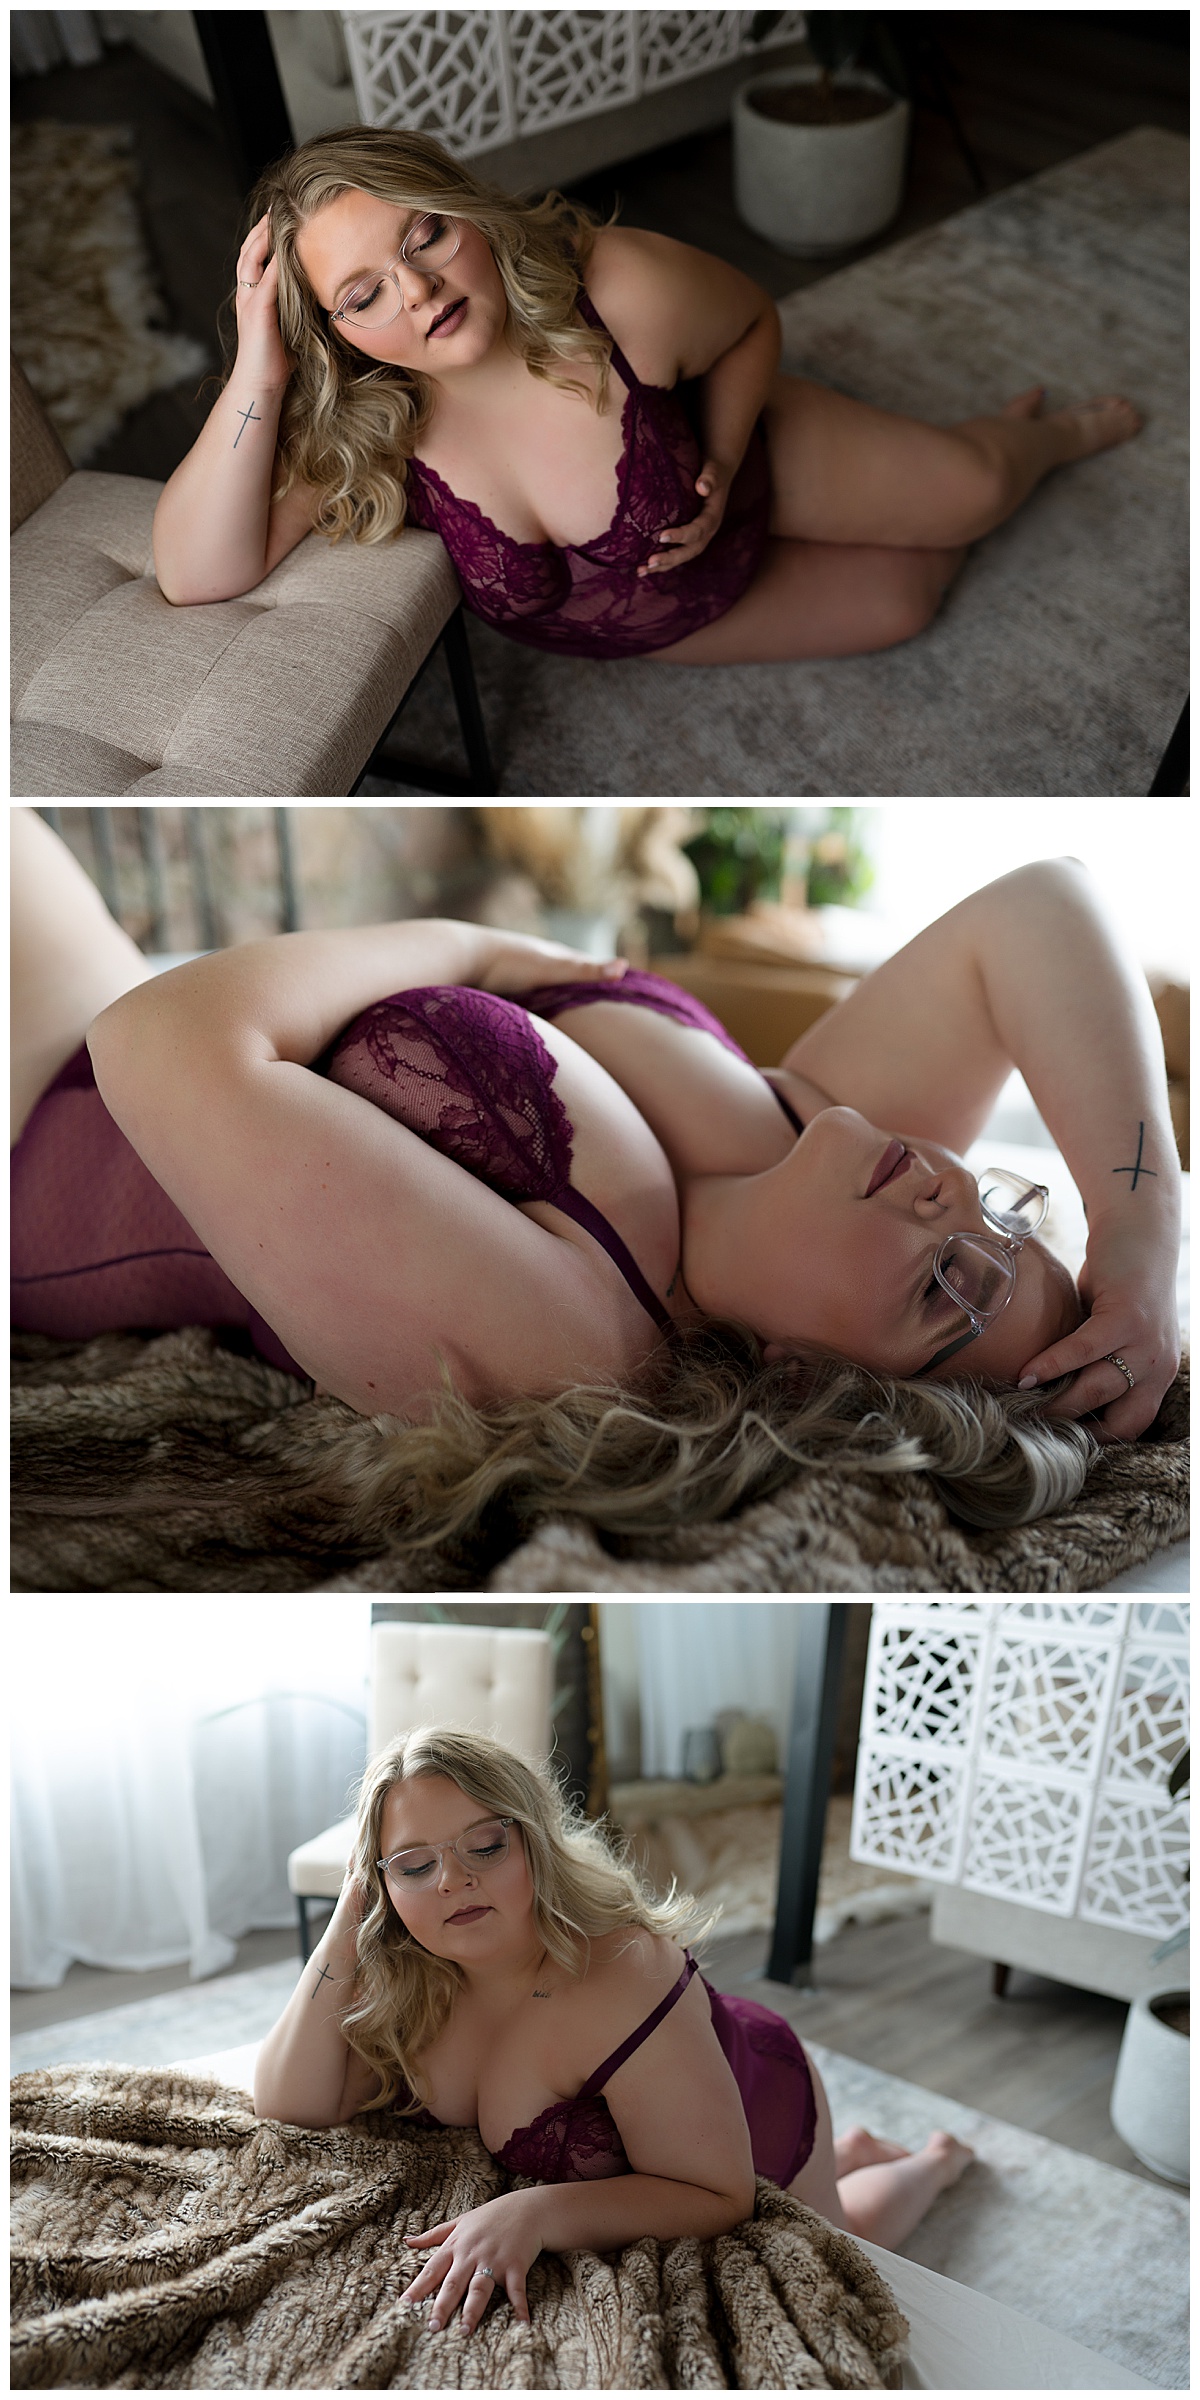 Woman lays on floor and edge of bed in shades of red lingerie 